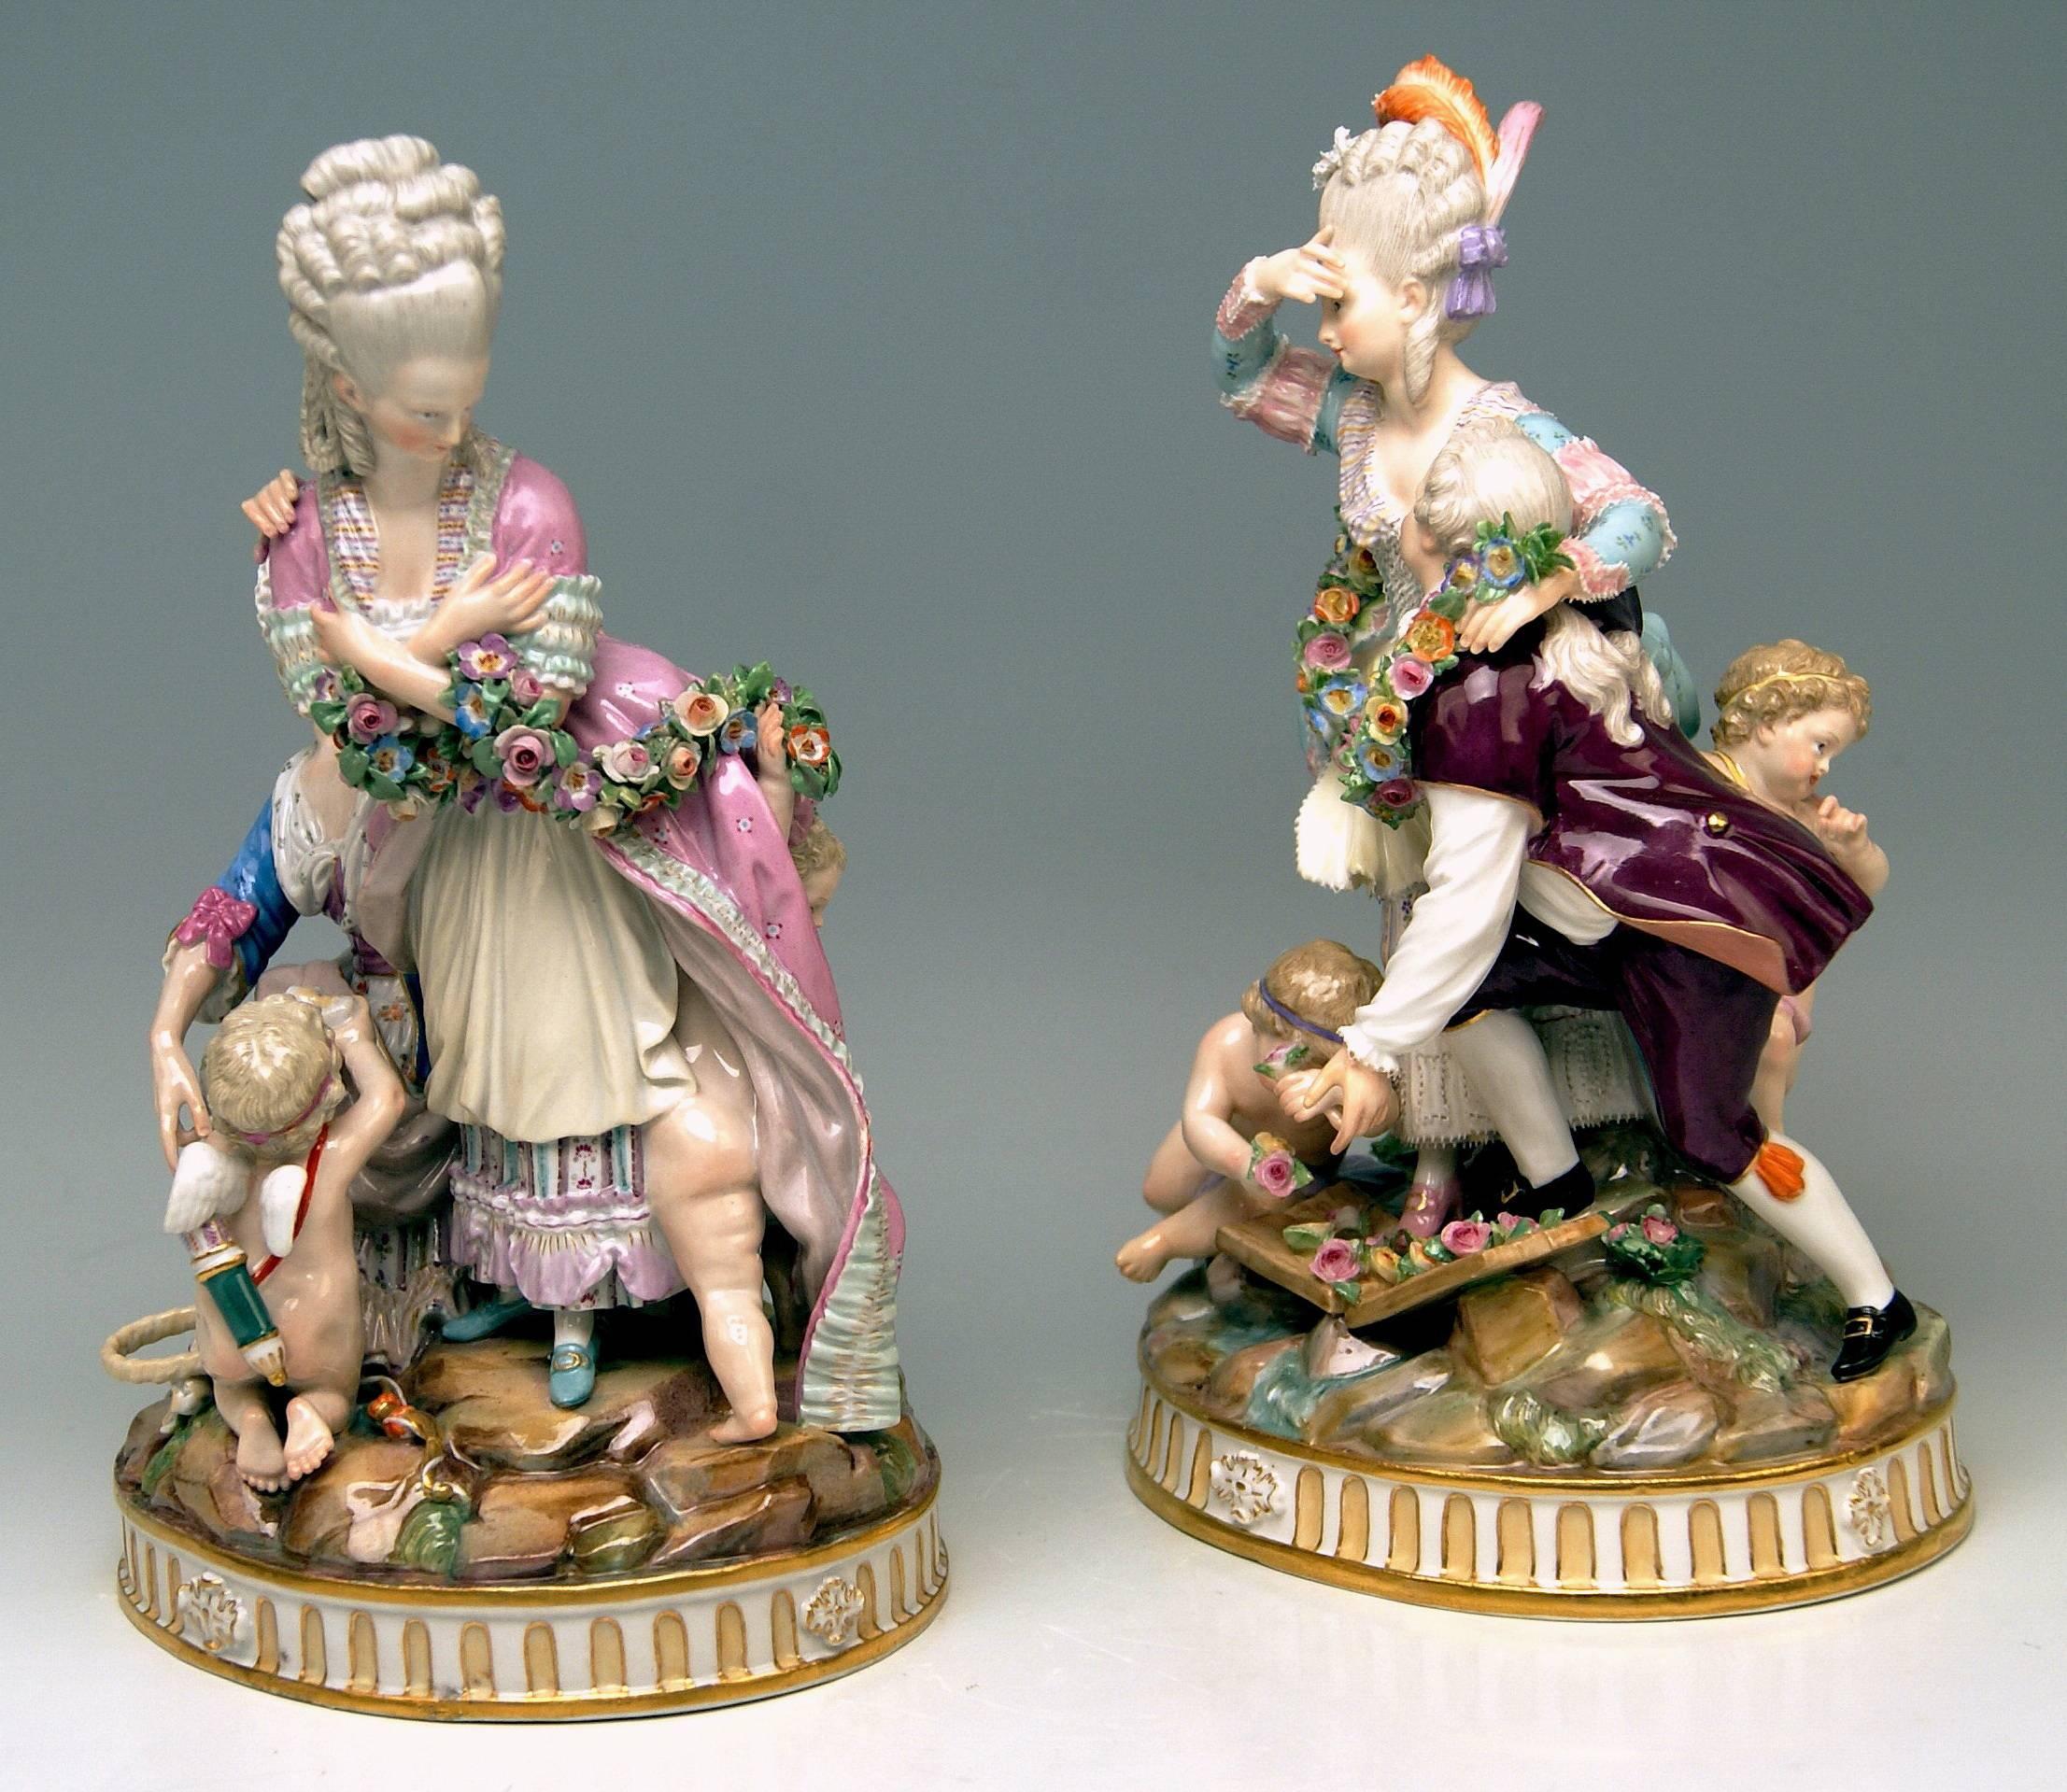 MEISSEN PAIR OF GORGEOUS FIGURINES OF FINEST QUALITY:  
- THE BROKEN EGGS
- THE BROKEN BRIDGE

MANUFACTORY:  MEISSEN
DATING: MIDDLE OF 19TH CENTURY, MADE CIRCA 1860 - 70
MARKS:
BLUE MEISSEN SWORD MARK OF 19TH CENTURY (WITH POMMELS ON HILTS) ATTACHED